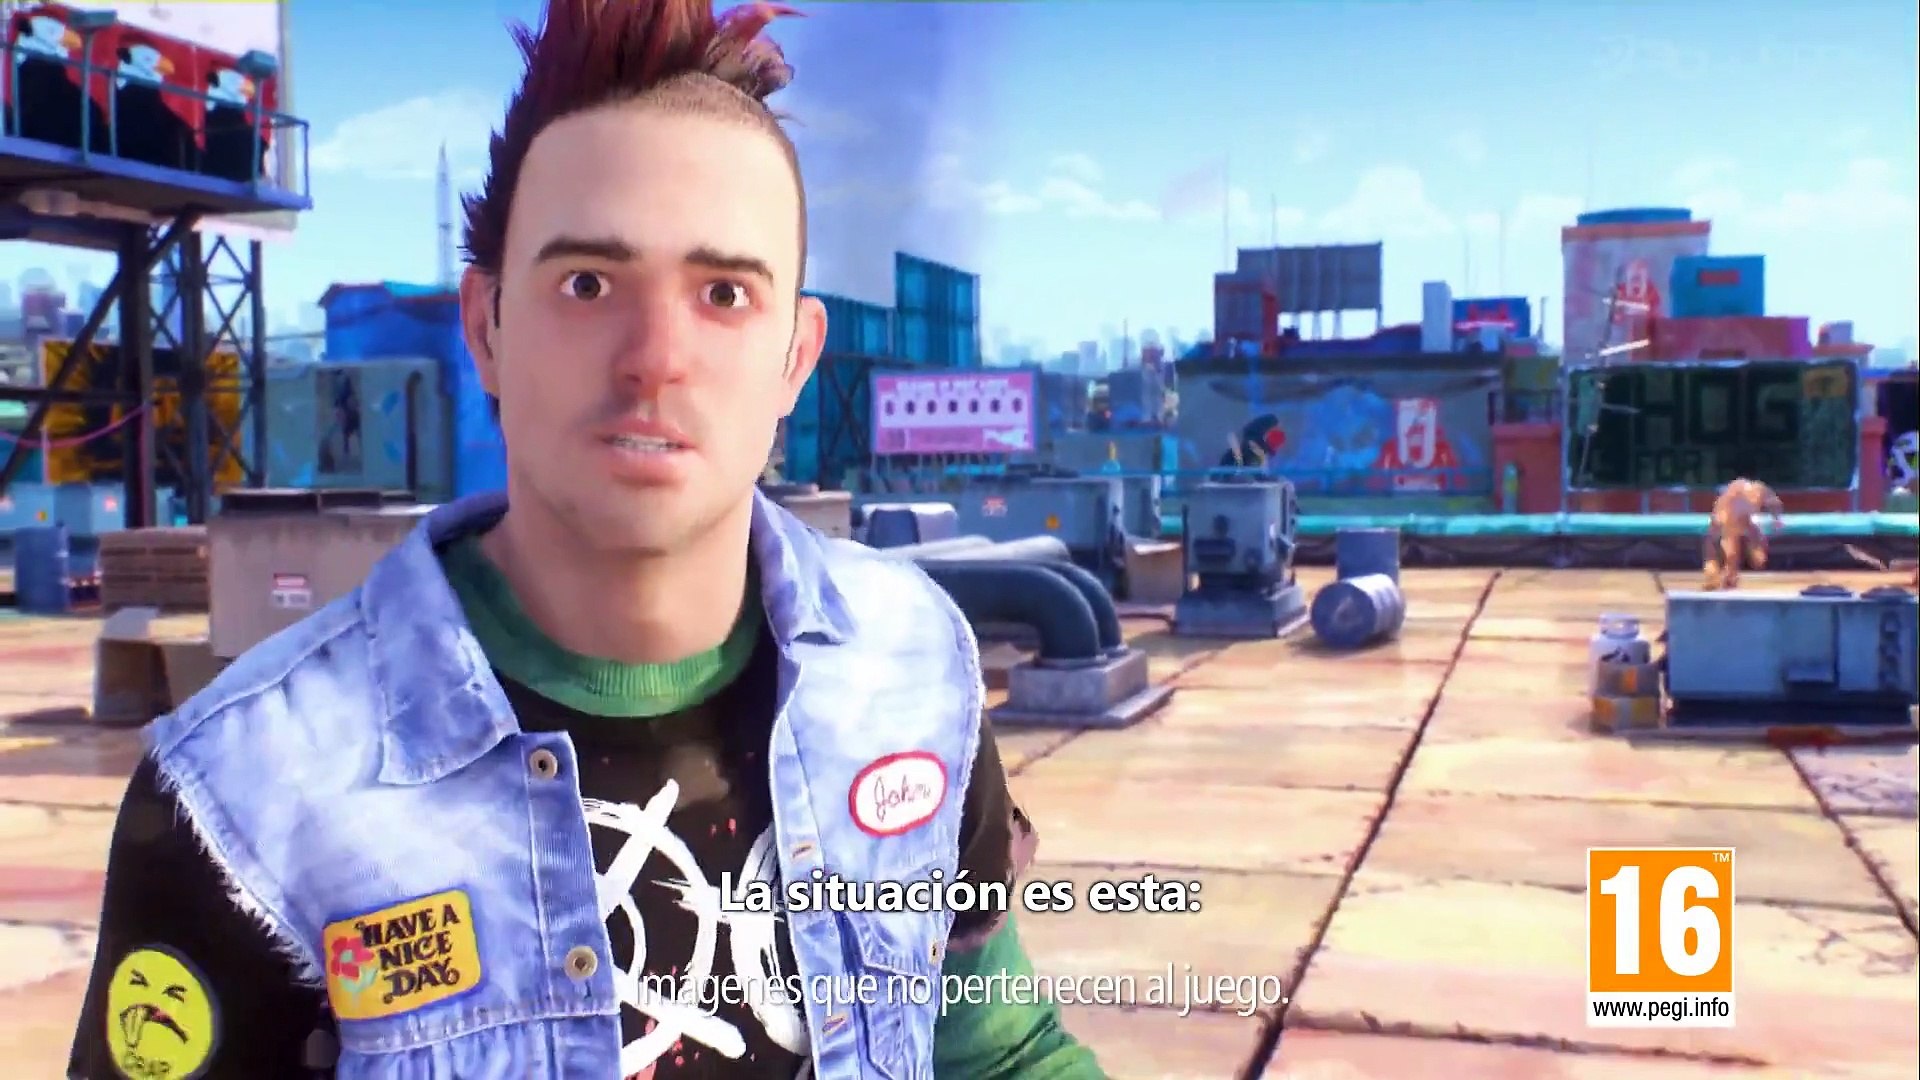 SUNSET OVERDRIVE Impressions and Gameplay — GeekTyrant